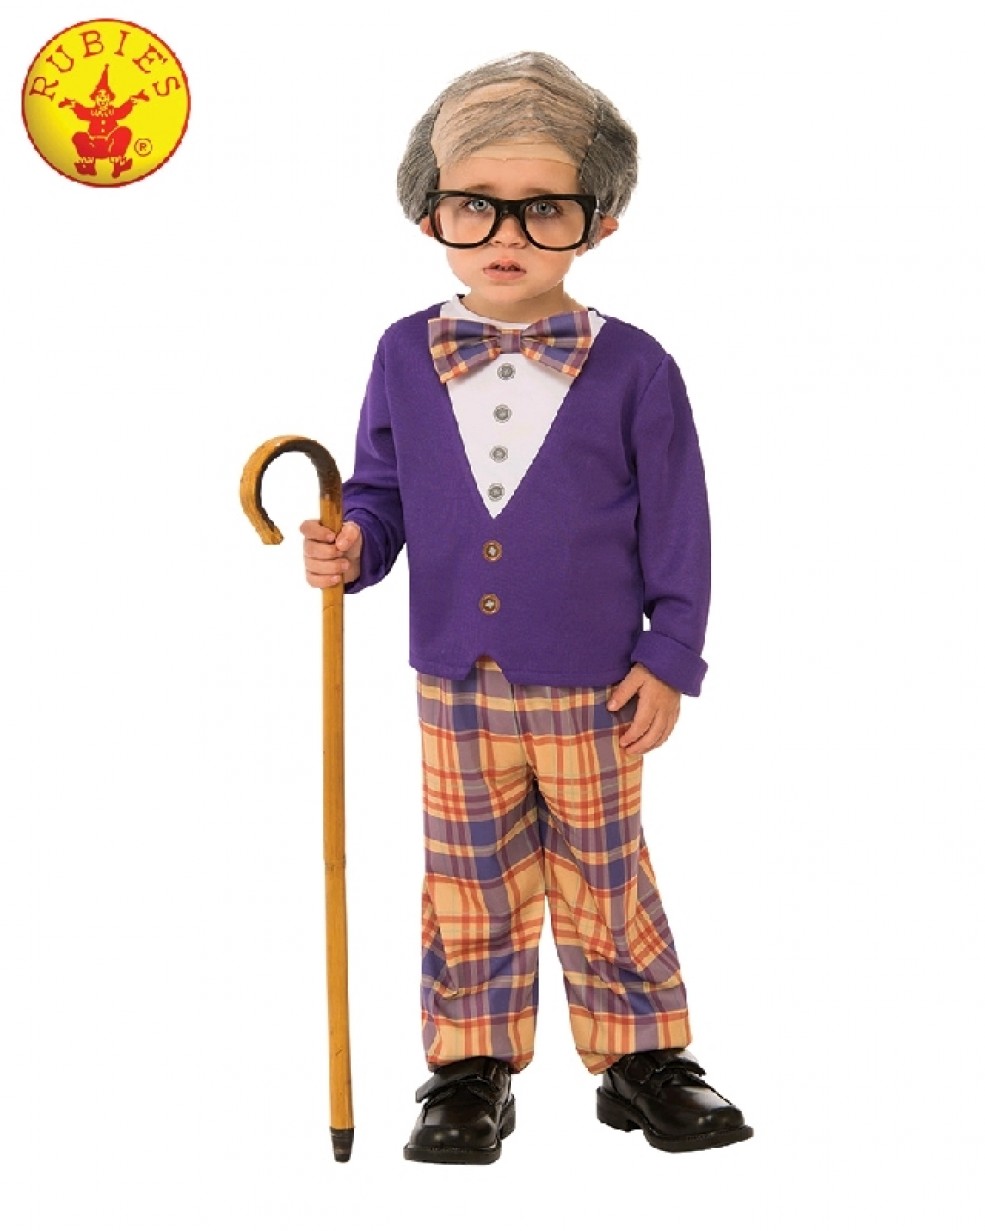 Grandpa little Old man Geezer Child Cosplay Costume Party Kids Outfit 100  days of school - Groups & Couples Costume - Themes |Costumes-AU